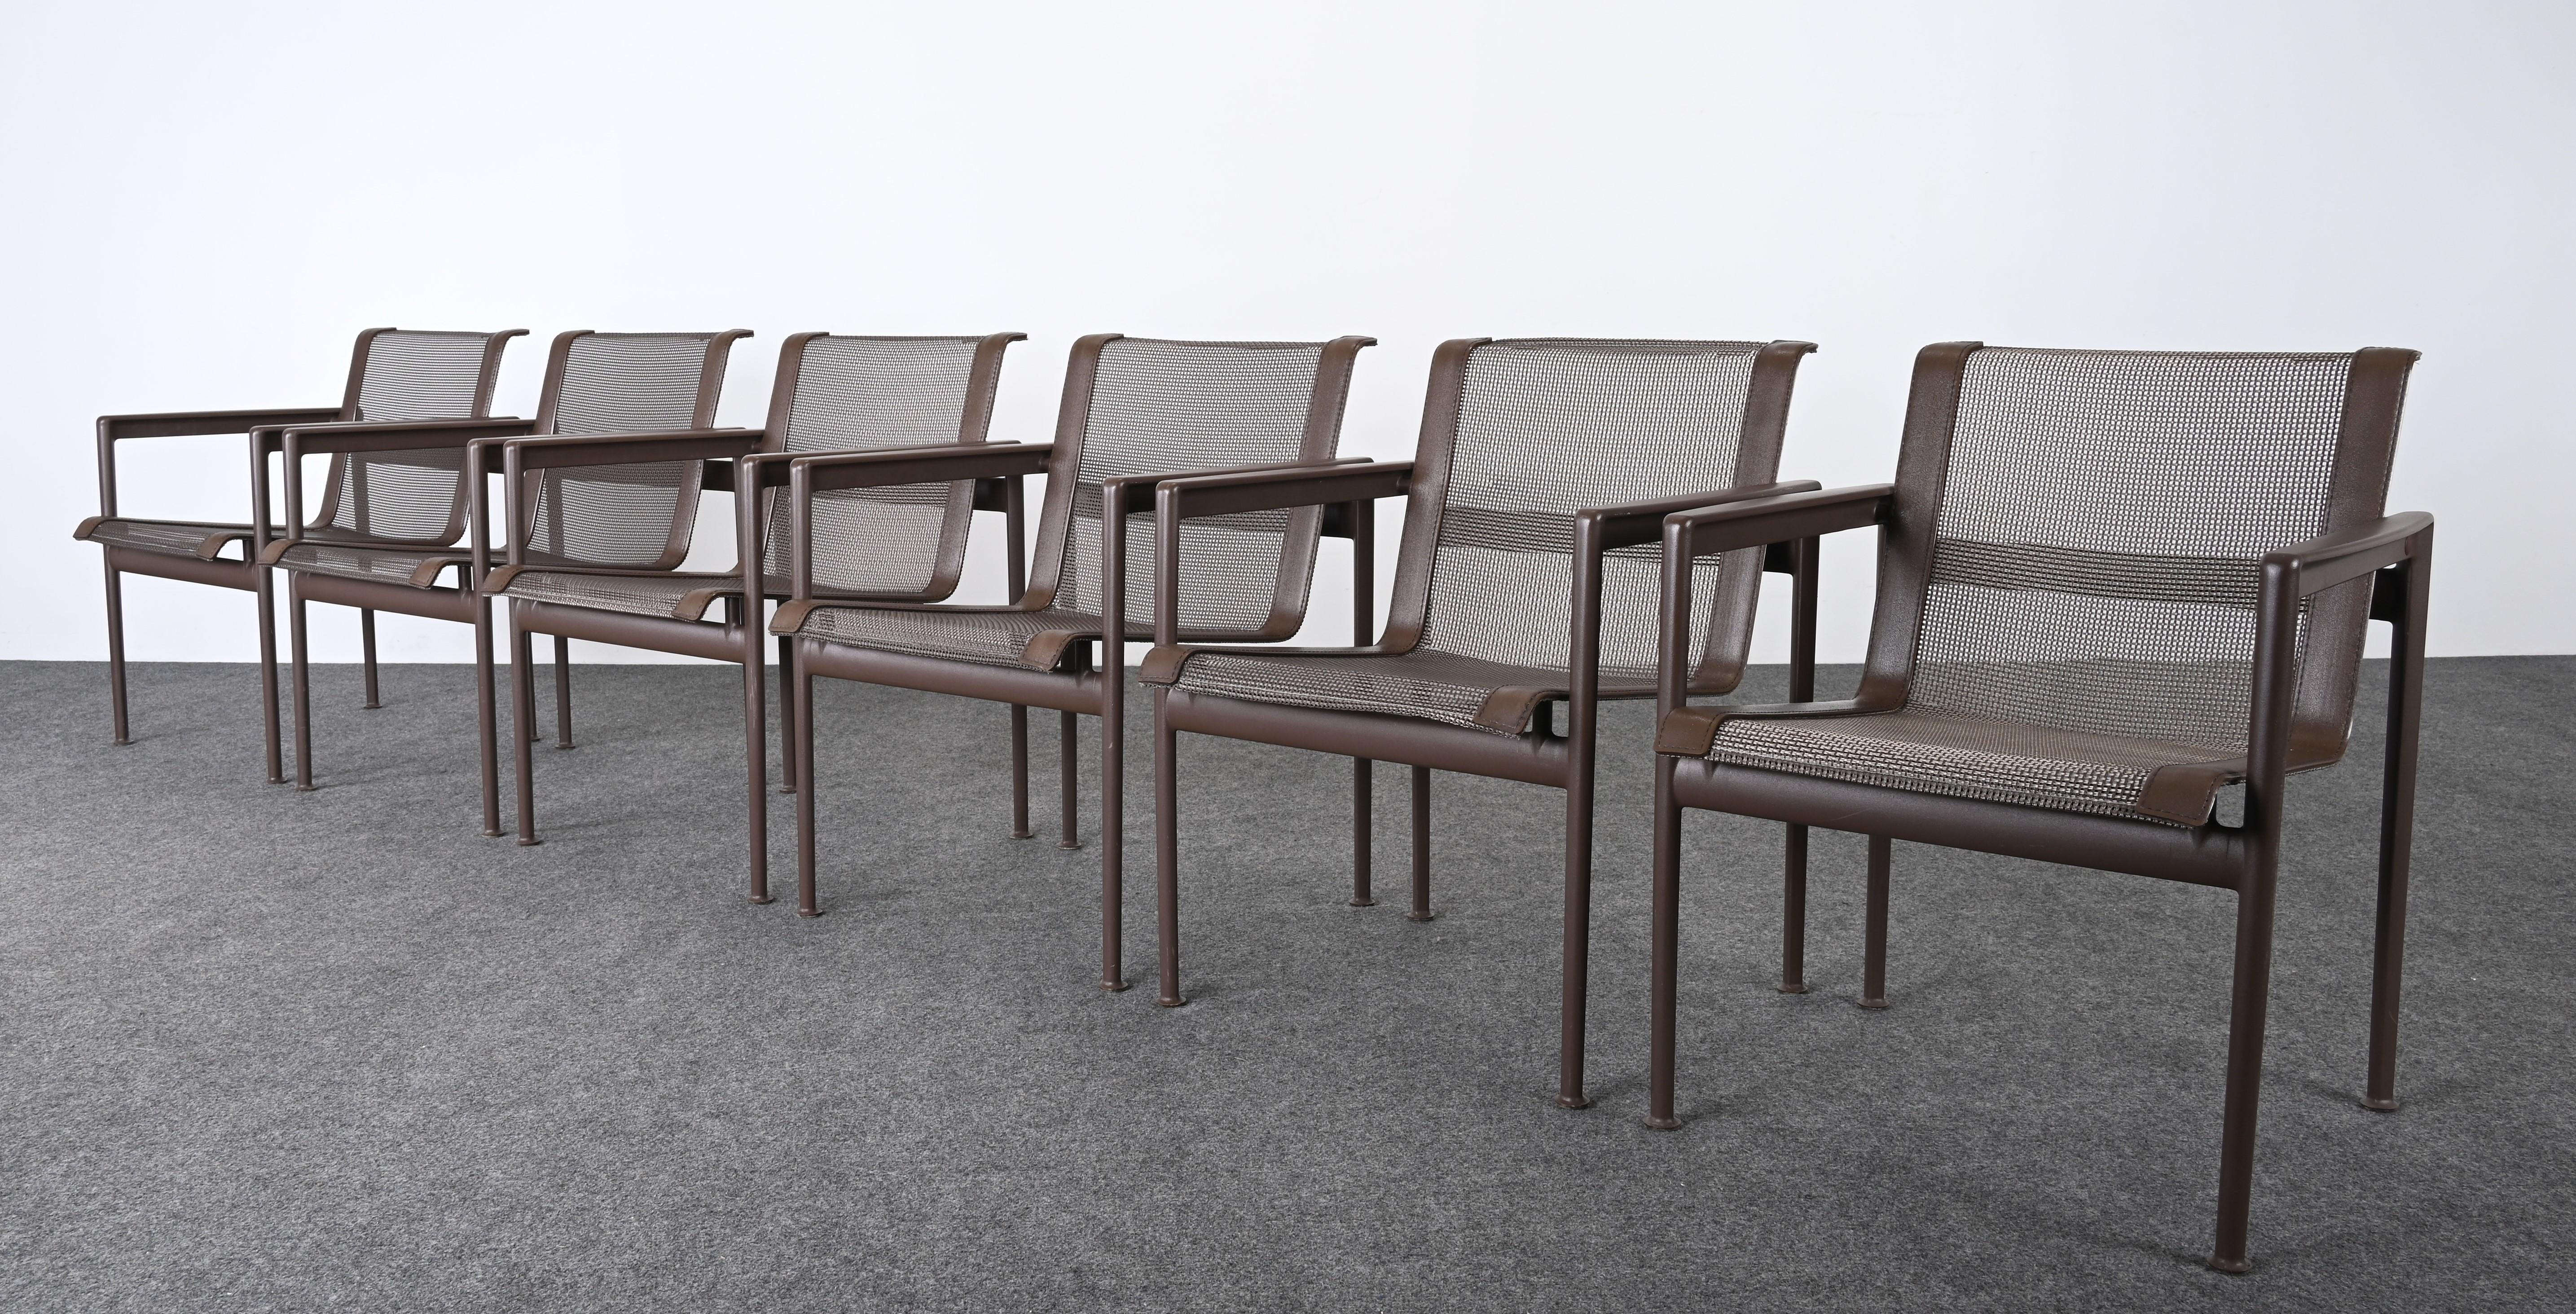 A functional and stylish set of six modern outdoor dining chairs designed by Richard Schultz for Knoll. These vintage dining chairs have a chestnut aluminum frame with mesh and leather seats. This classic design would work great in any outdoor patio